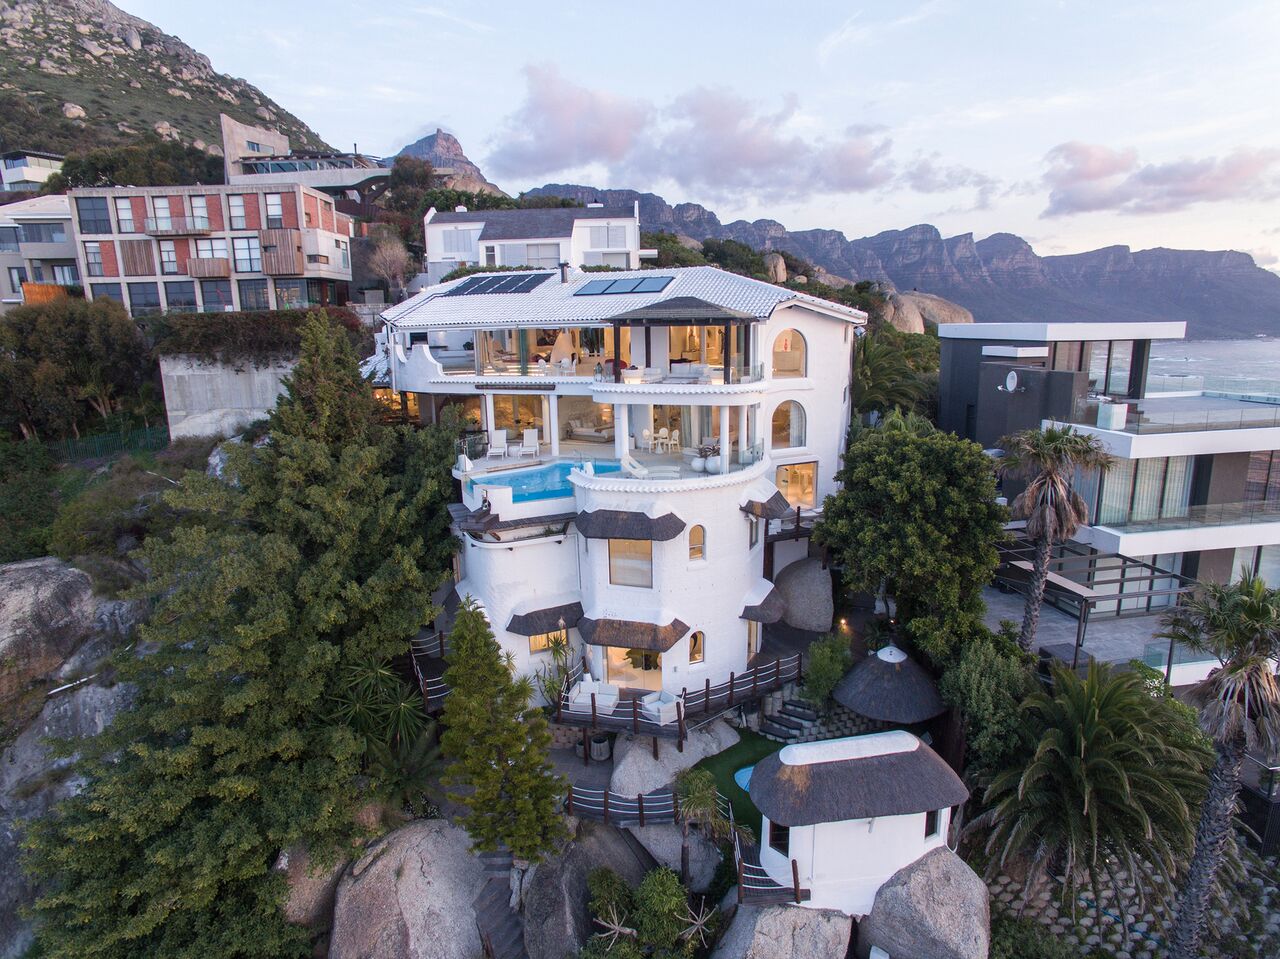 Photo 23 of Eagles Rock Villa accommodation in Bantry Bay, Cape Town with 6 bedrooms and 6 bathrooms